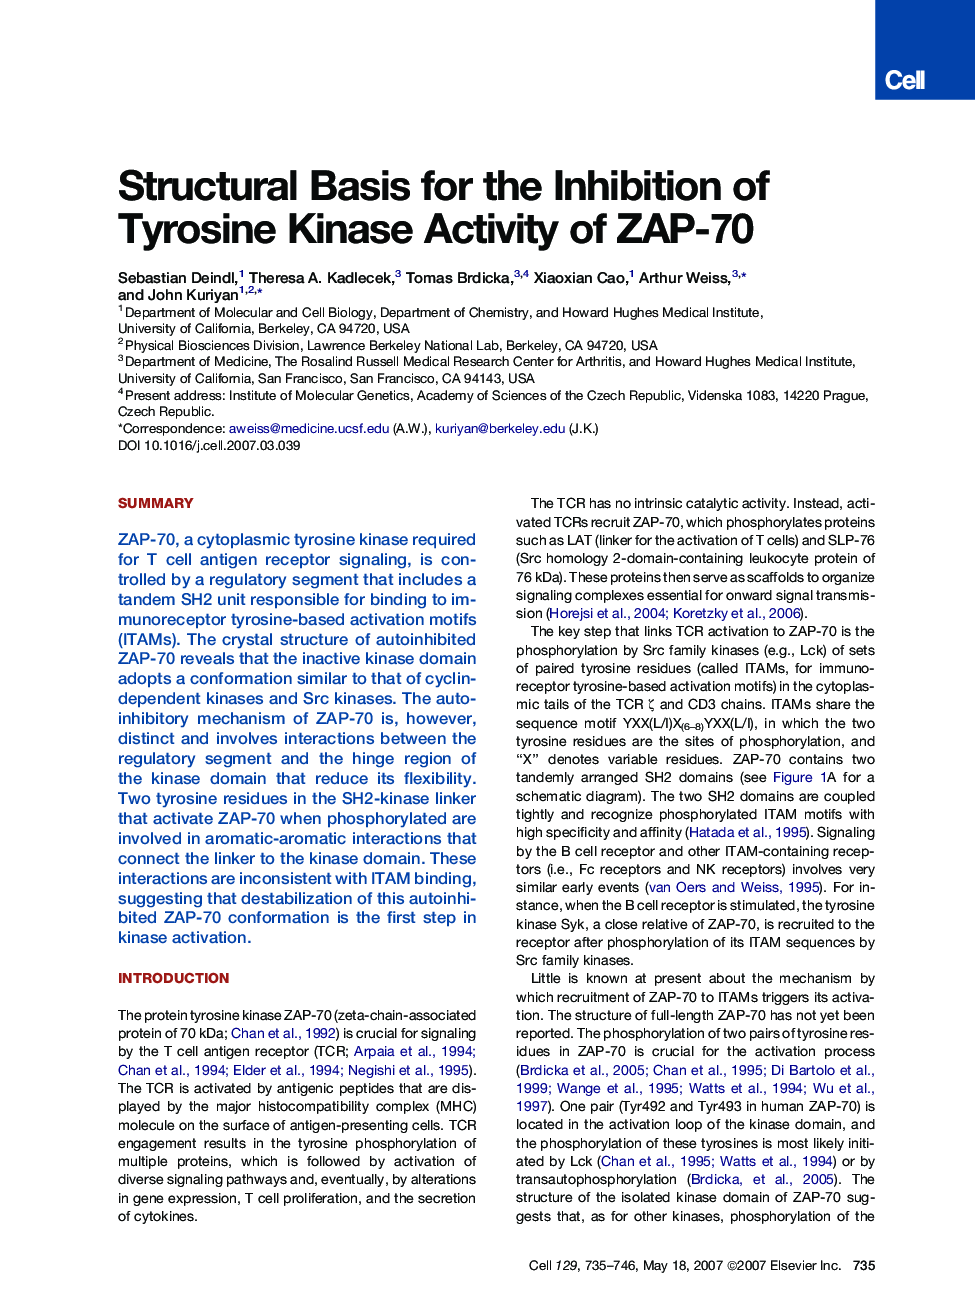 Structural Basis for the Inhibition of Tyrosine Kinase Activity of ZAP-70